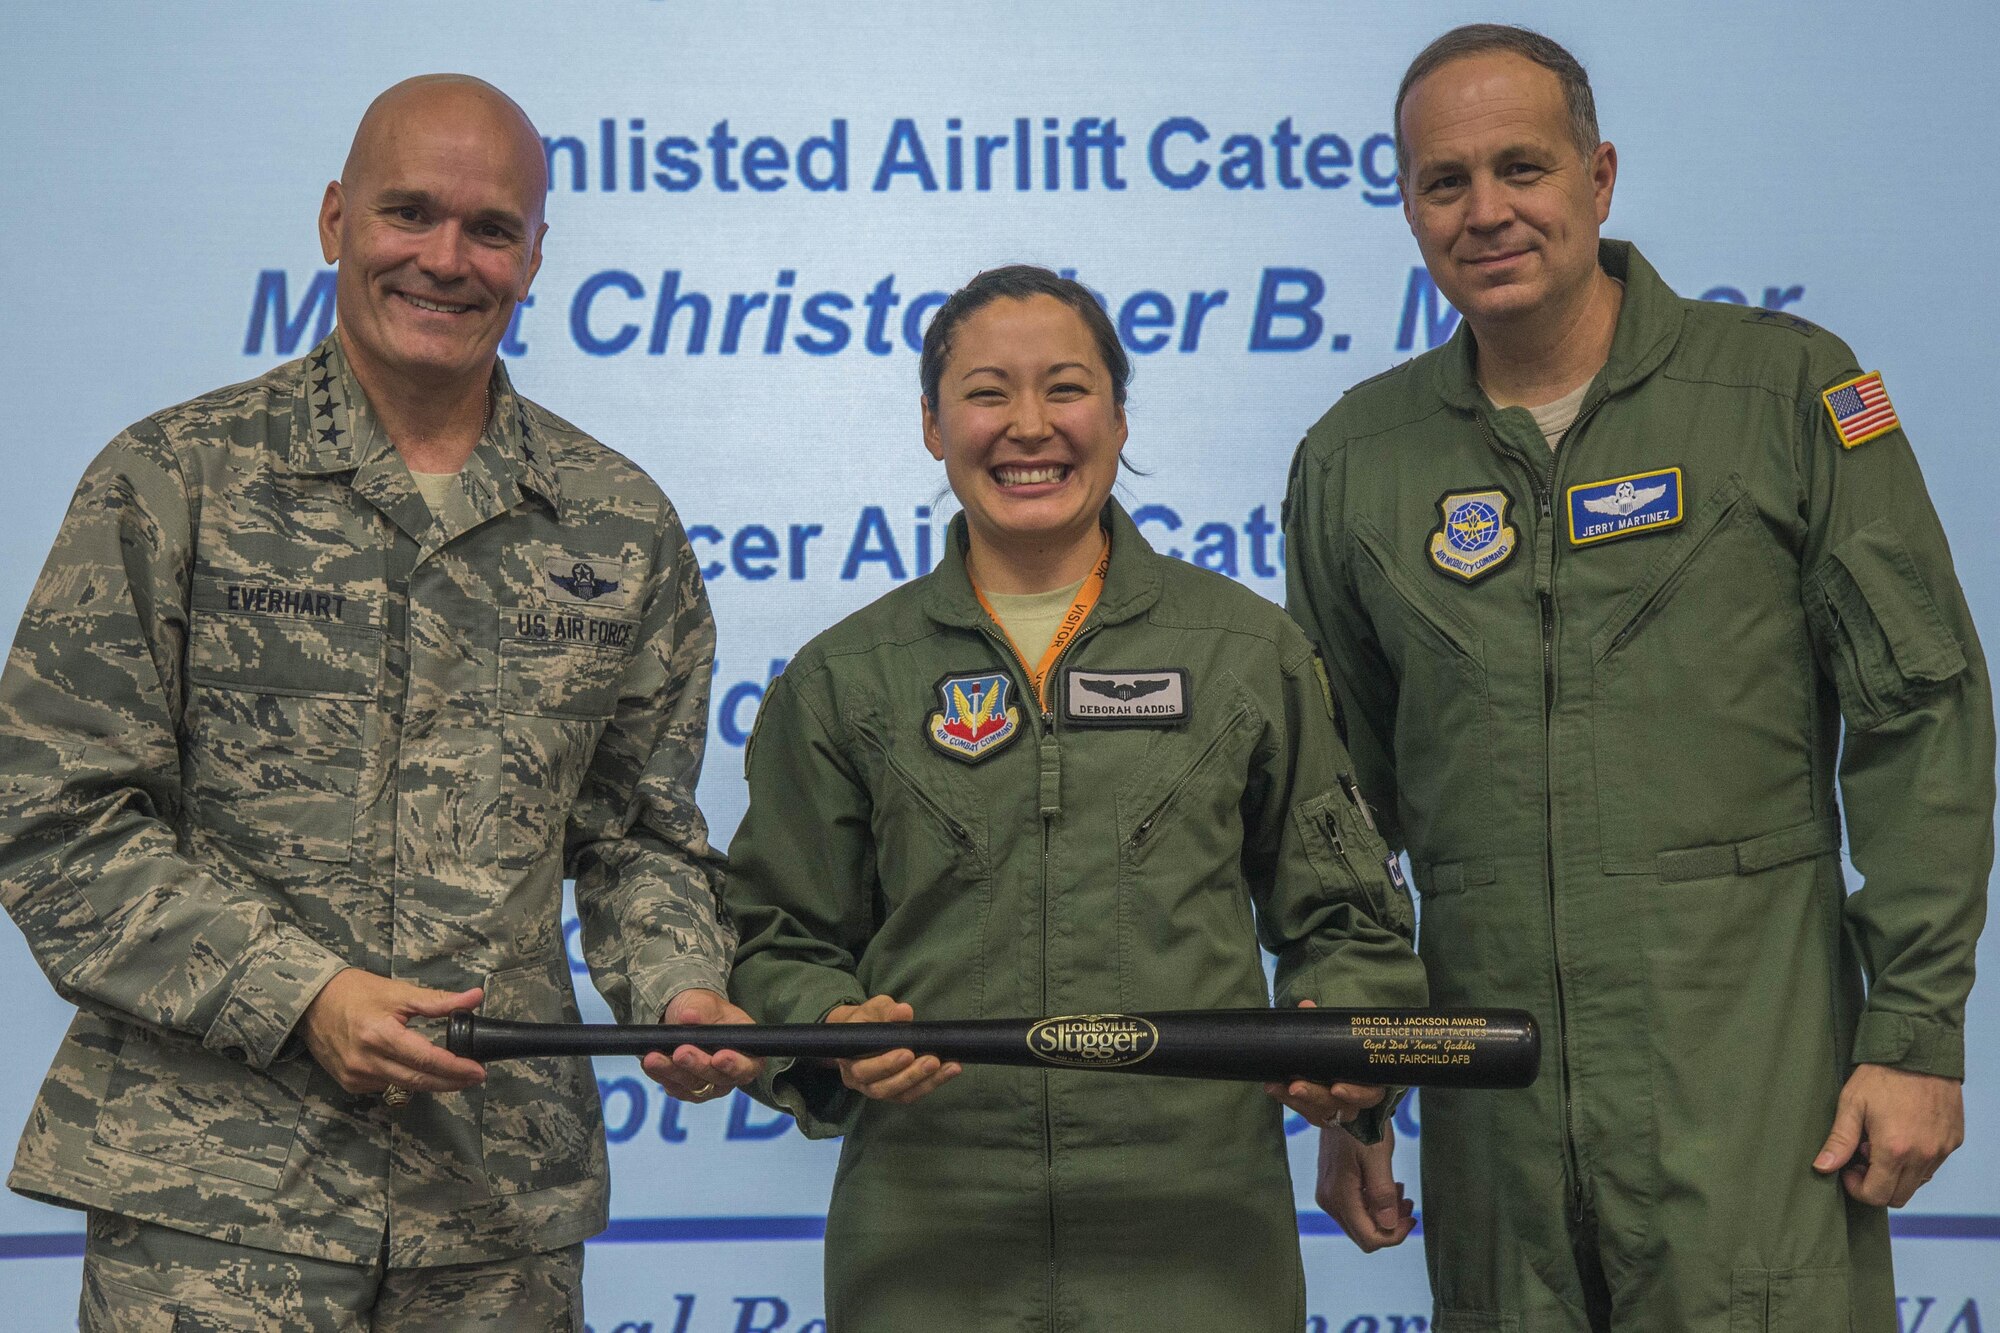 Capt. Deborah Gaddis, 509th Weapons Squadron training flight commander and Weapons Instructor Course instructor, accepts the 2016 Col. Joe Jackson Award for Excellence in Mobility Tactics from Gen. Carlton Everhart, Air Mobility Command commander, and Lt. Gen. Jerry P. Martinez, United States Forces Japan commander and previous AMC director of operations, Sept. 15, 2016, at Scott Air Force Base, Illinois. This annual award represents the very best in the significant achievement in mobility tactics, application of innovative weapons and tactics employment, and the instruction and evaluation of tactics which significantly contributed to increased readiness.
(Courtesy Photo)
